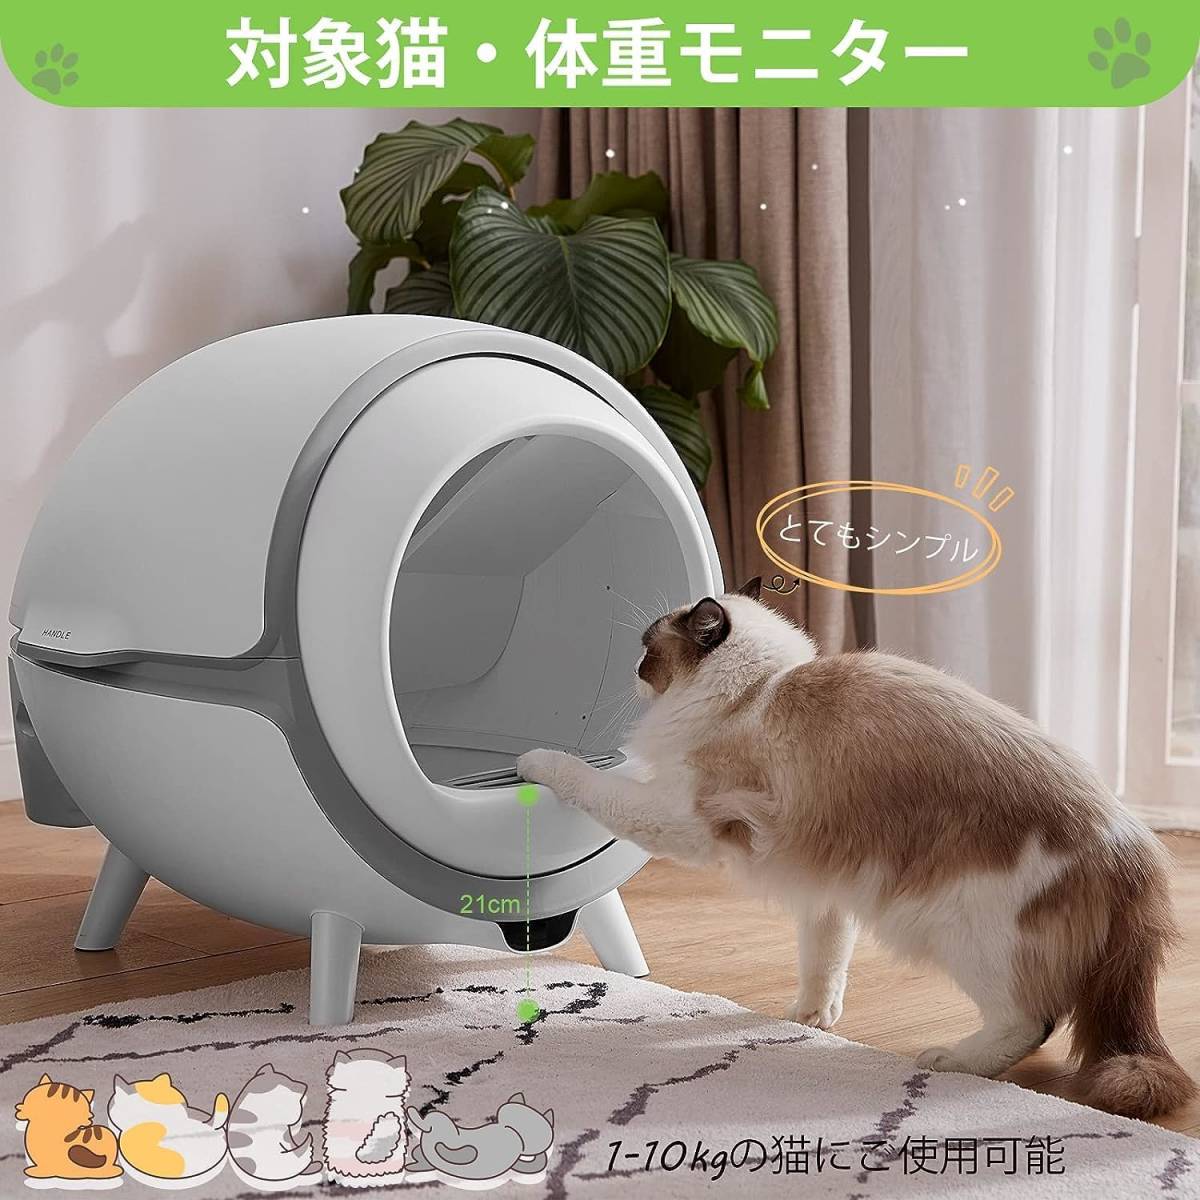  cat toilet automatic cat automatic toilet [ weight monitor * high capacity 9L*.. prevention * flushing possibility ]